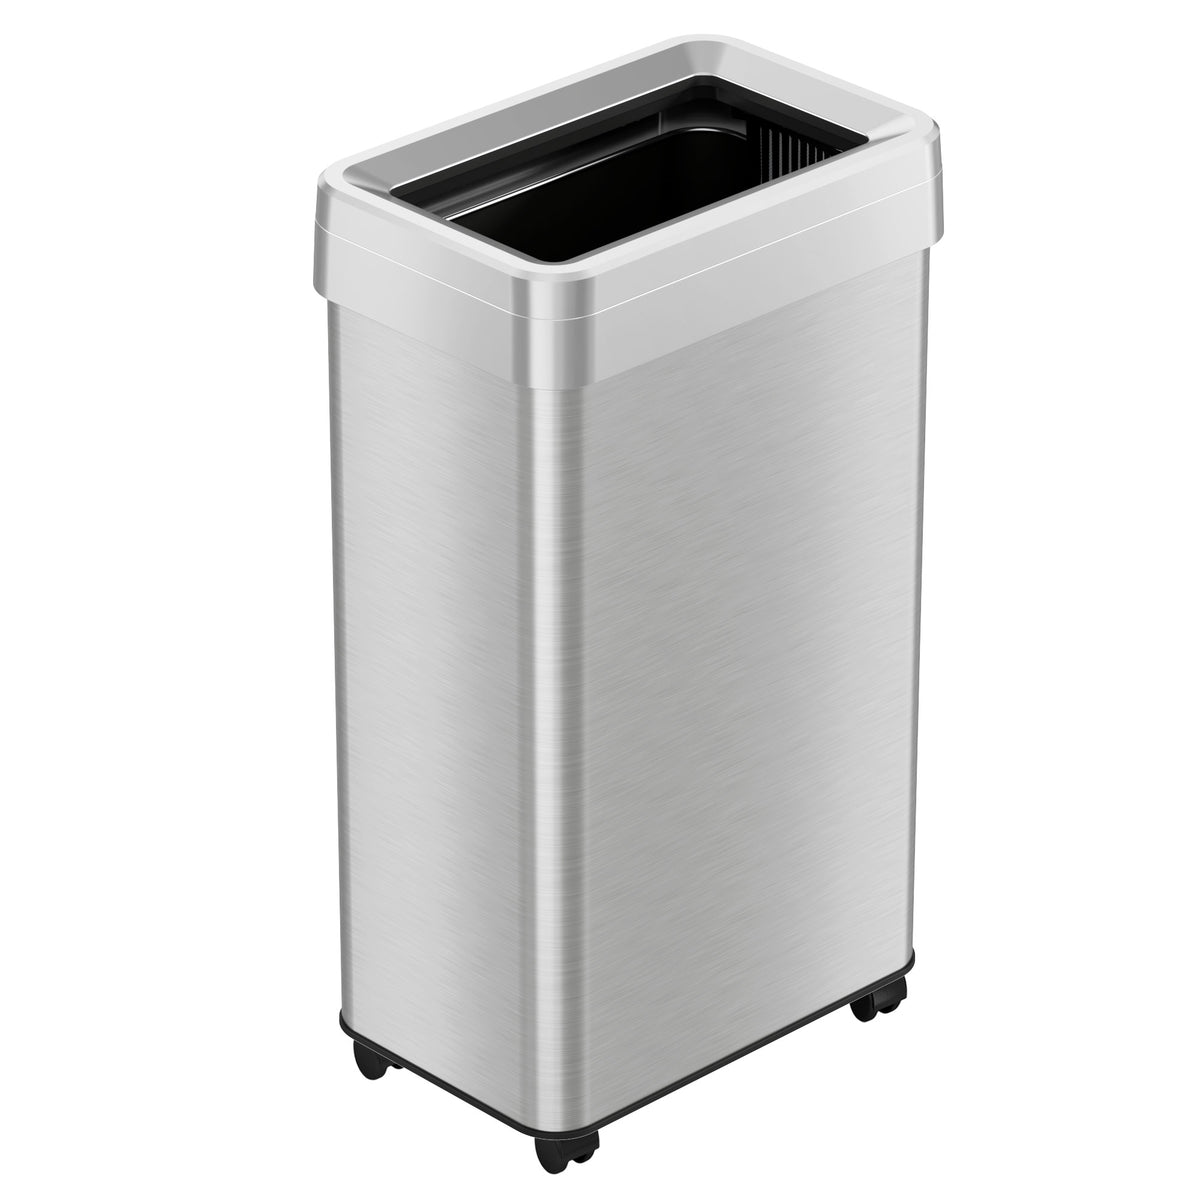 18 Gallon / 68 Liter Rectangular Open Top Trash Can with Wheels